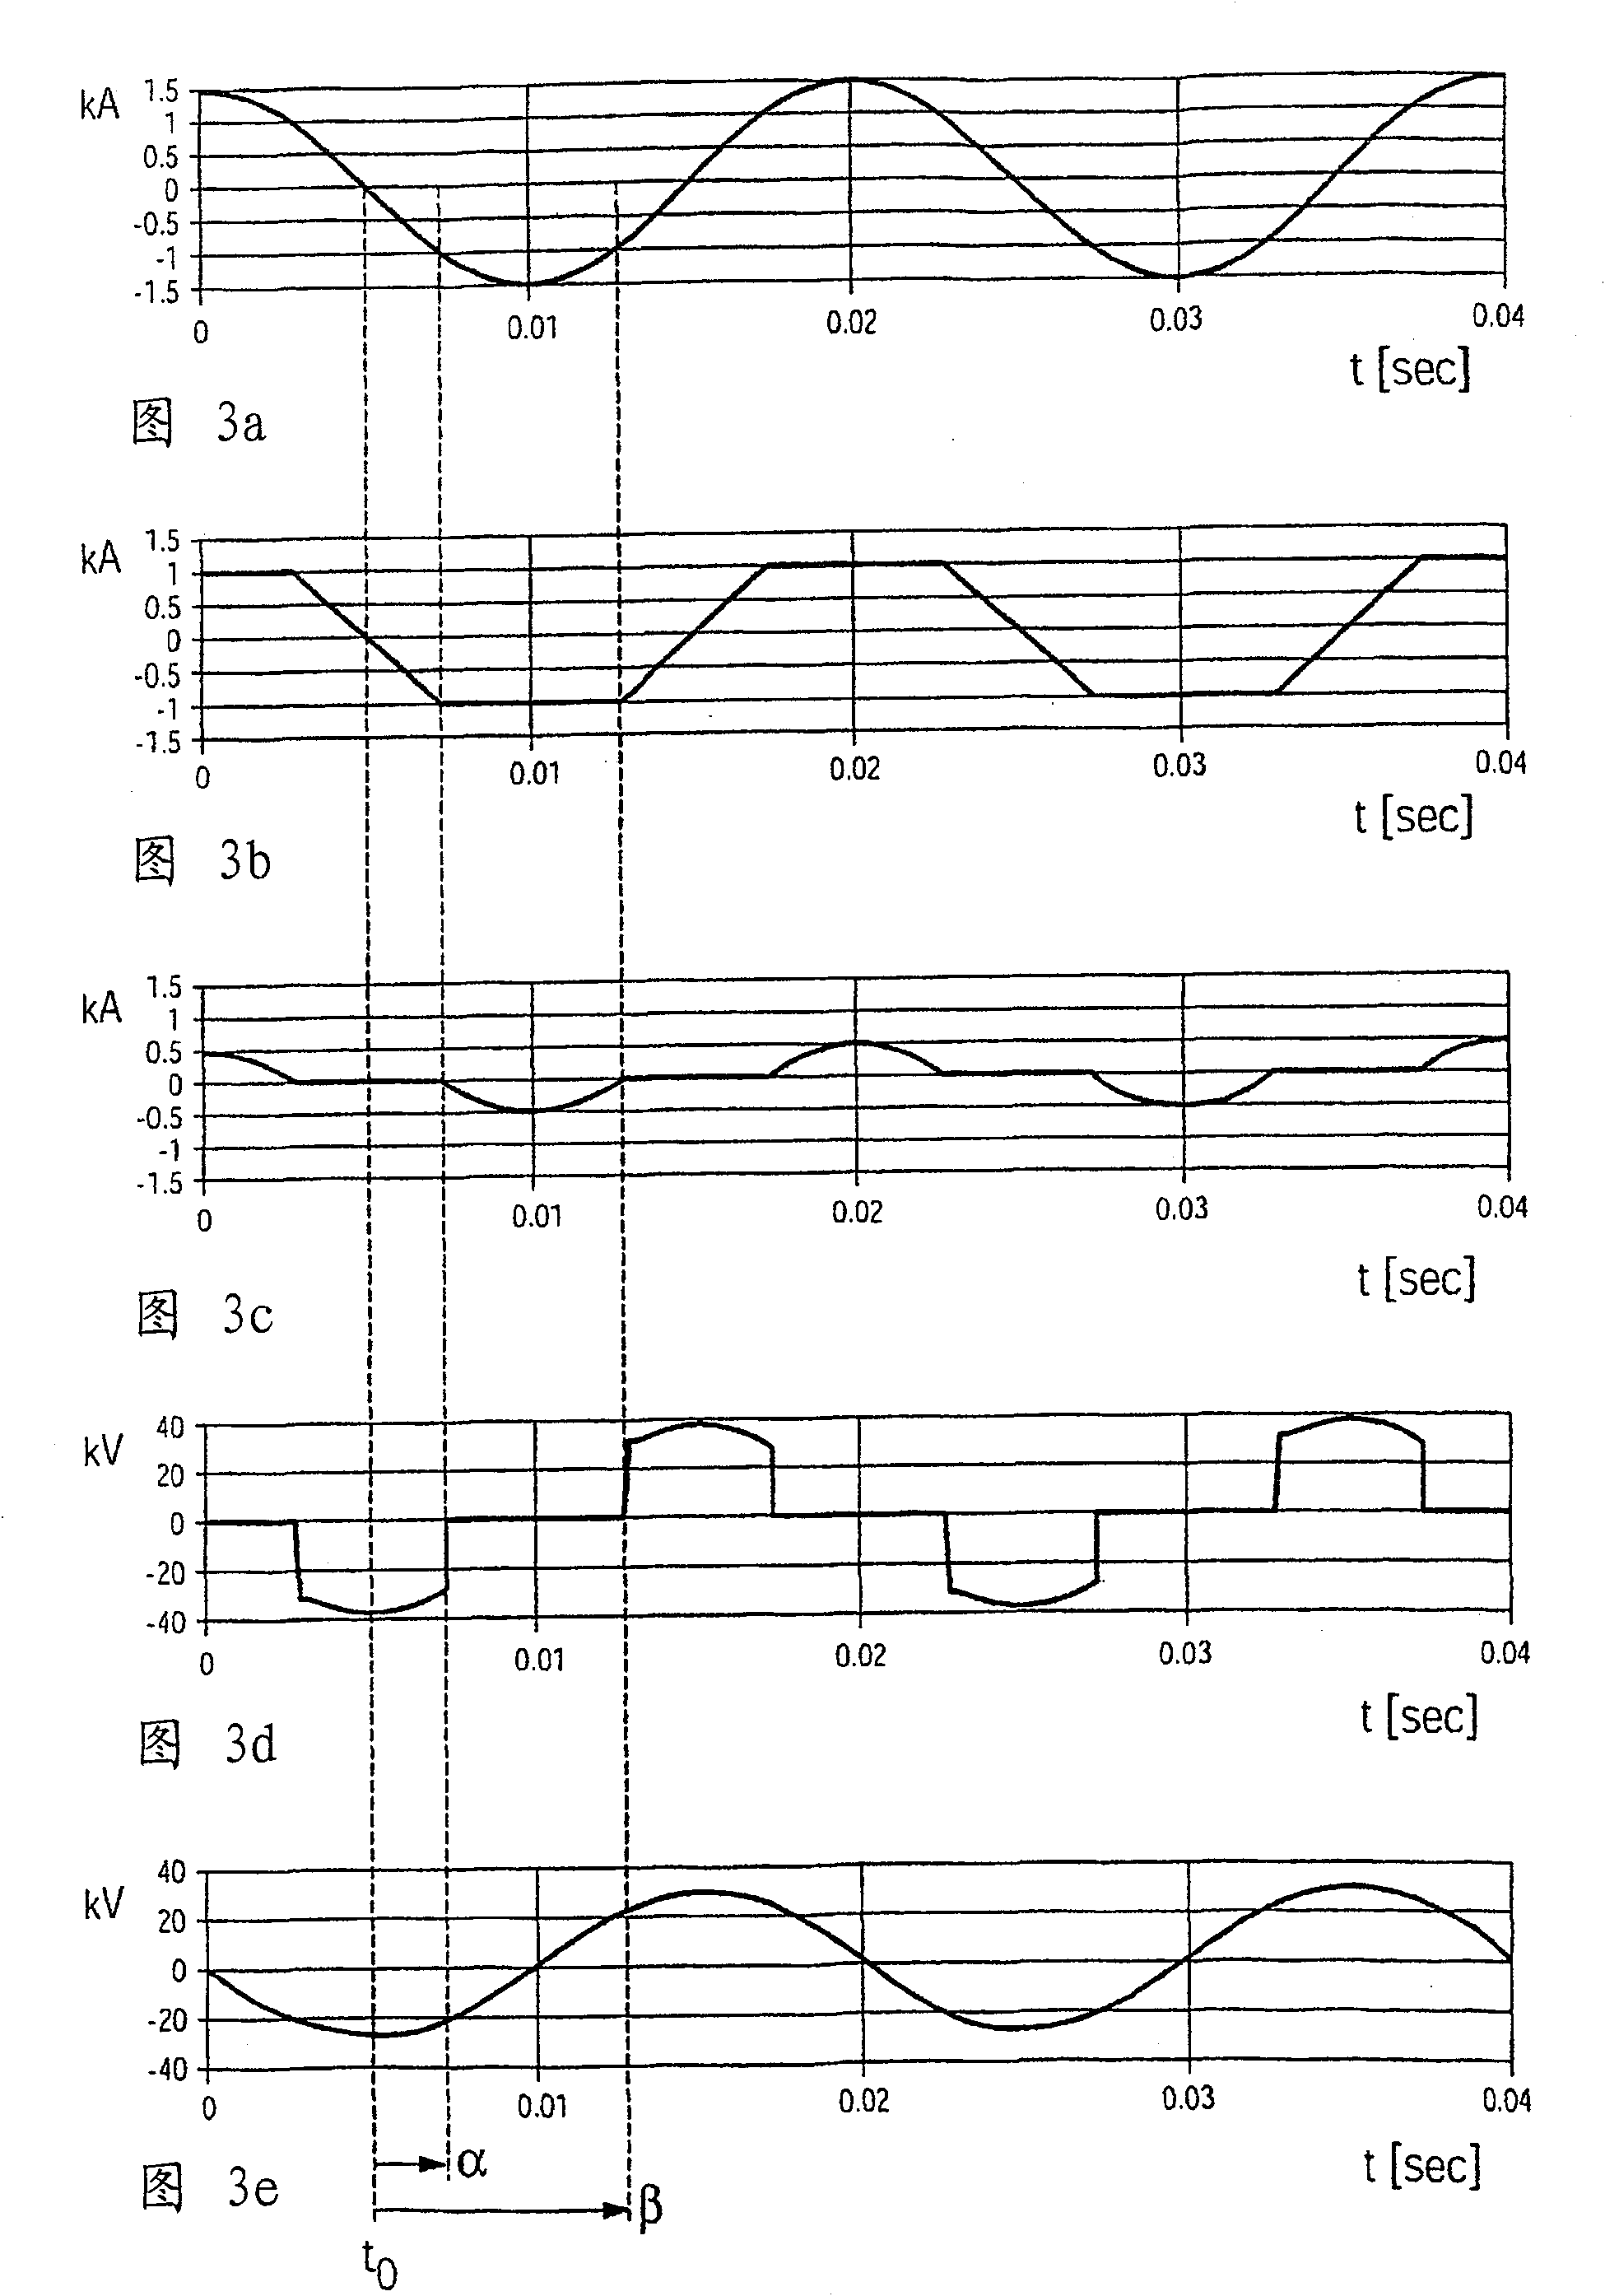 Device for adjusting the impedance of a high voltage line supplying an alternating current